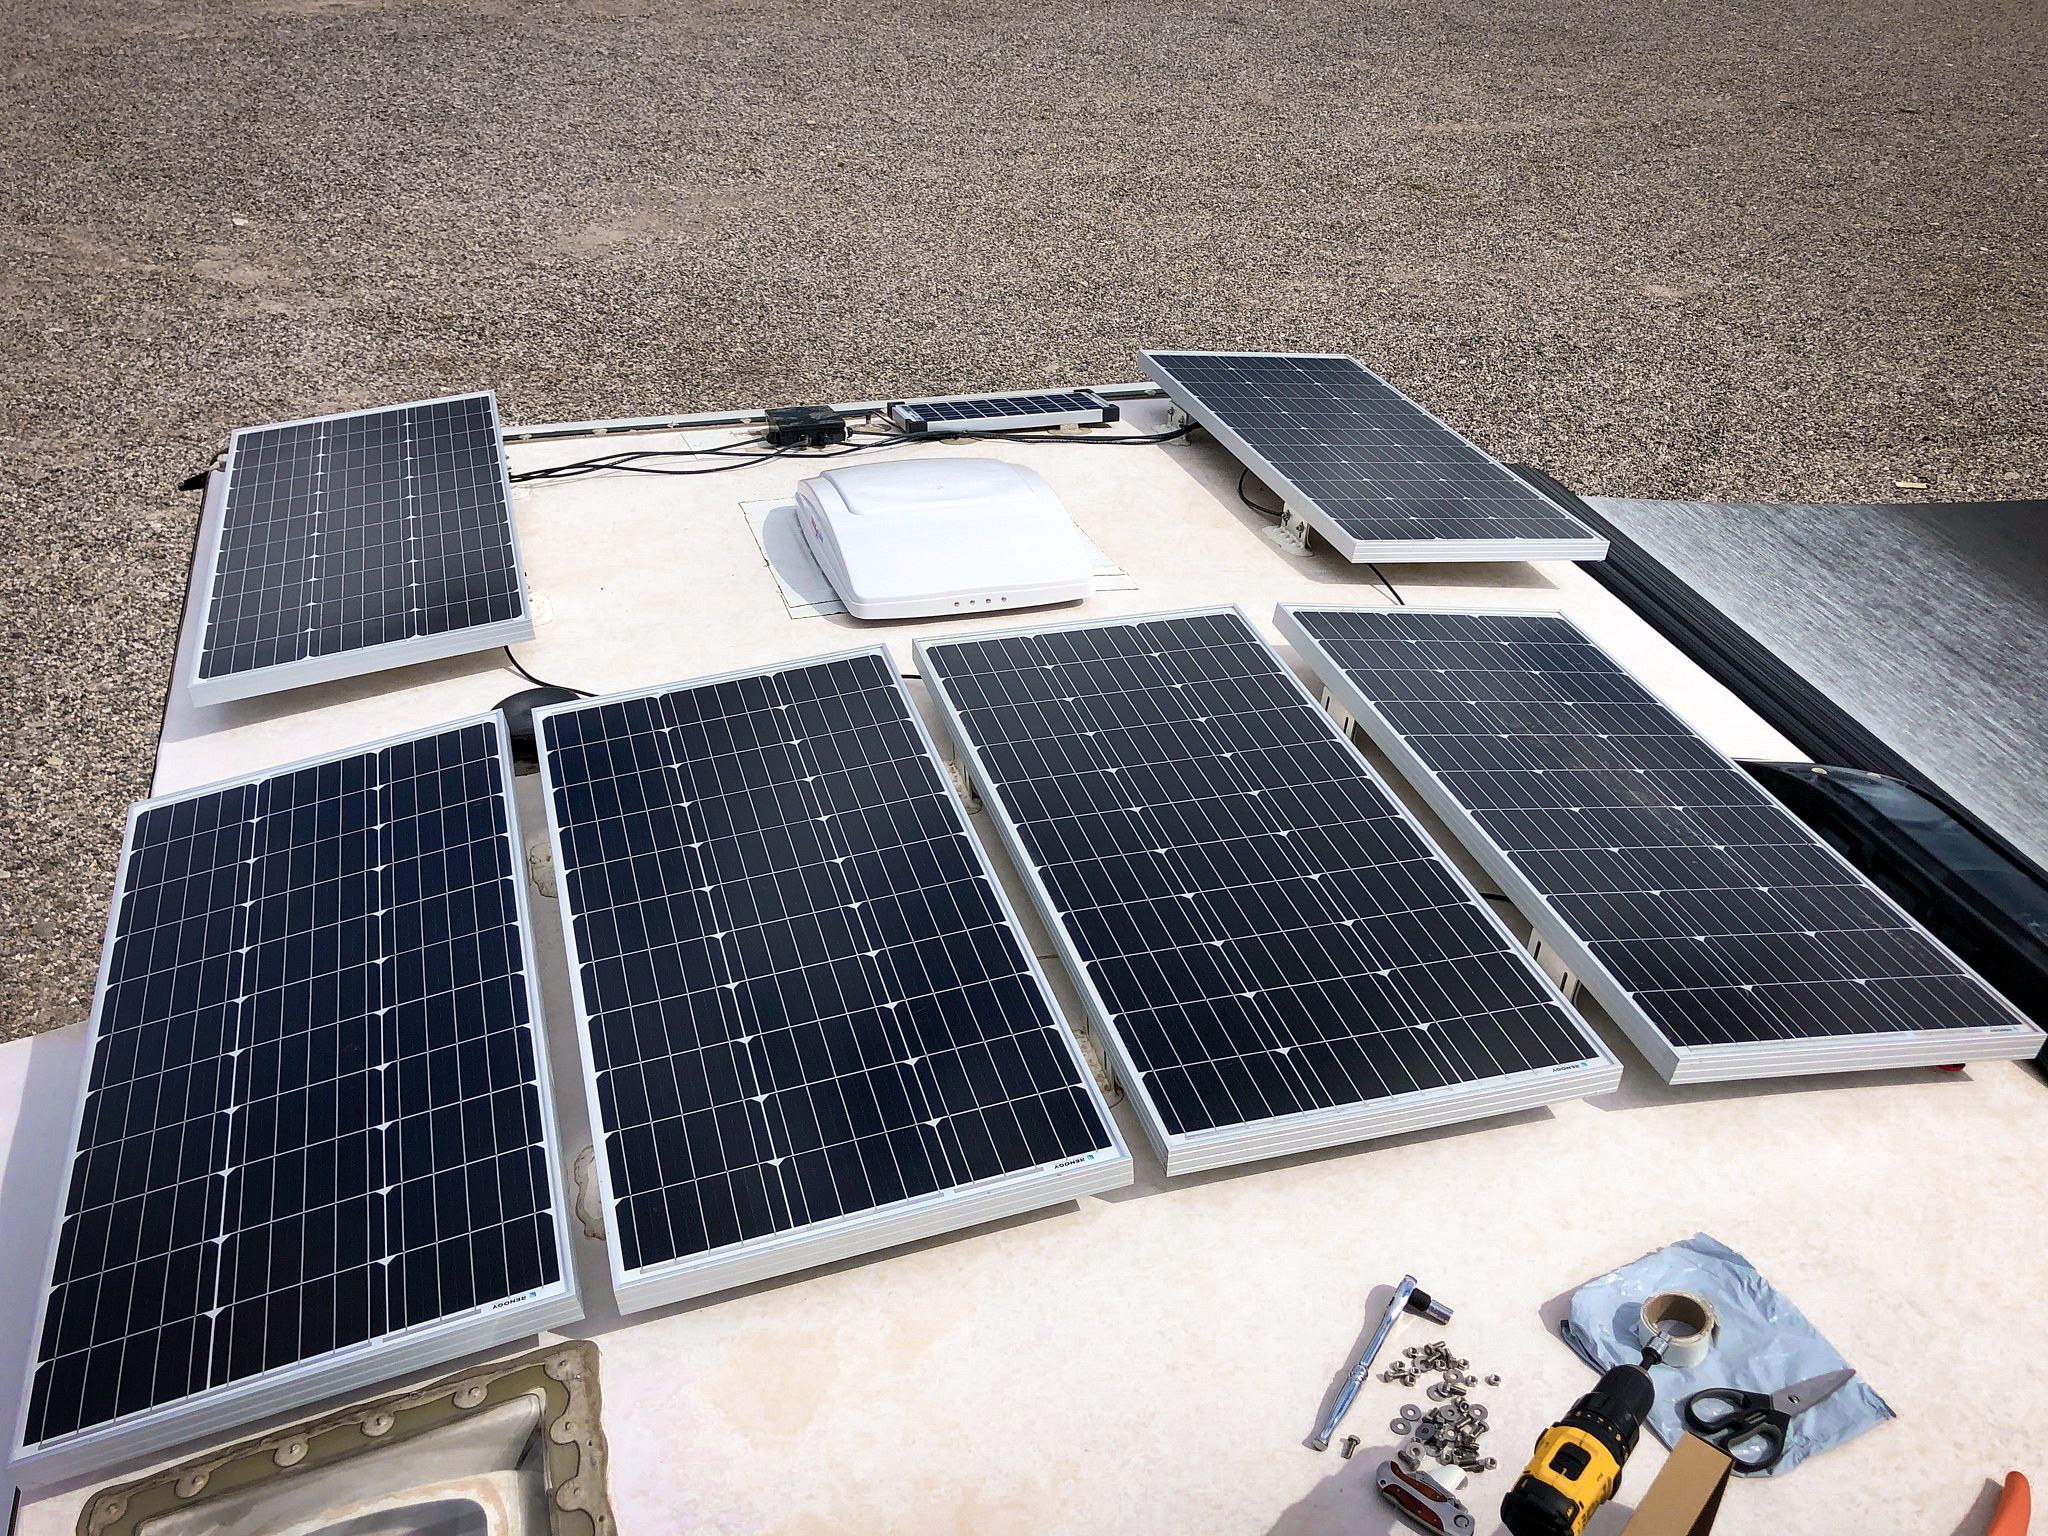 How to Add More Solar Panels to an Existing RV System?